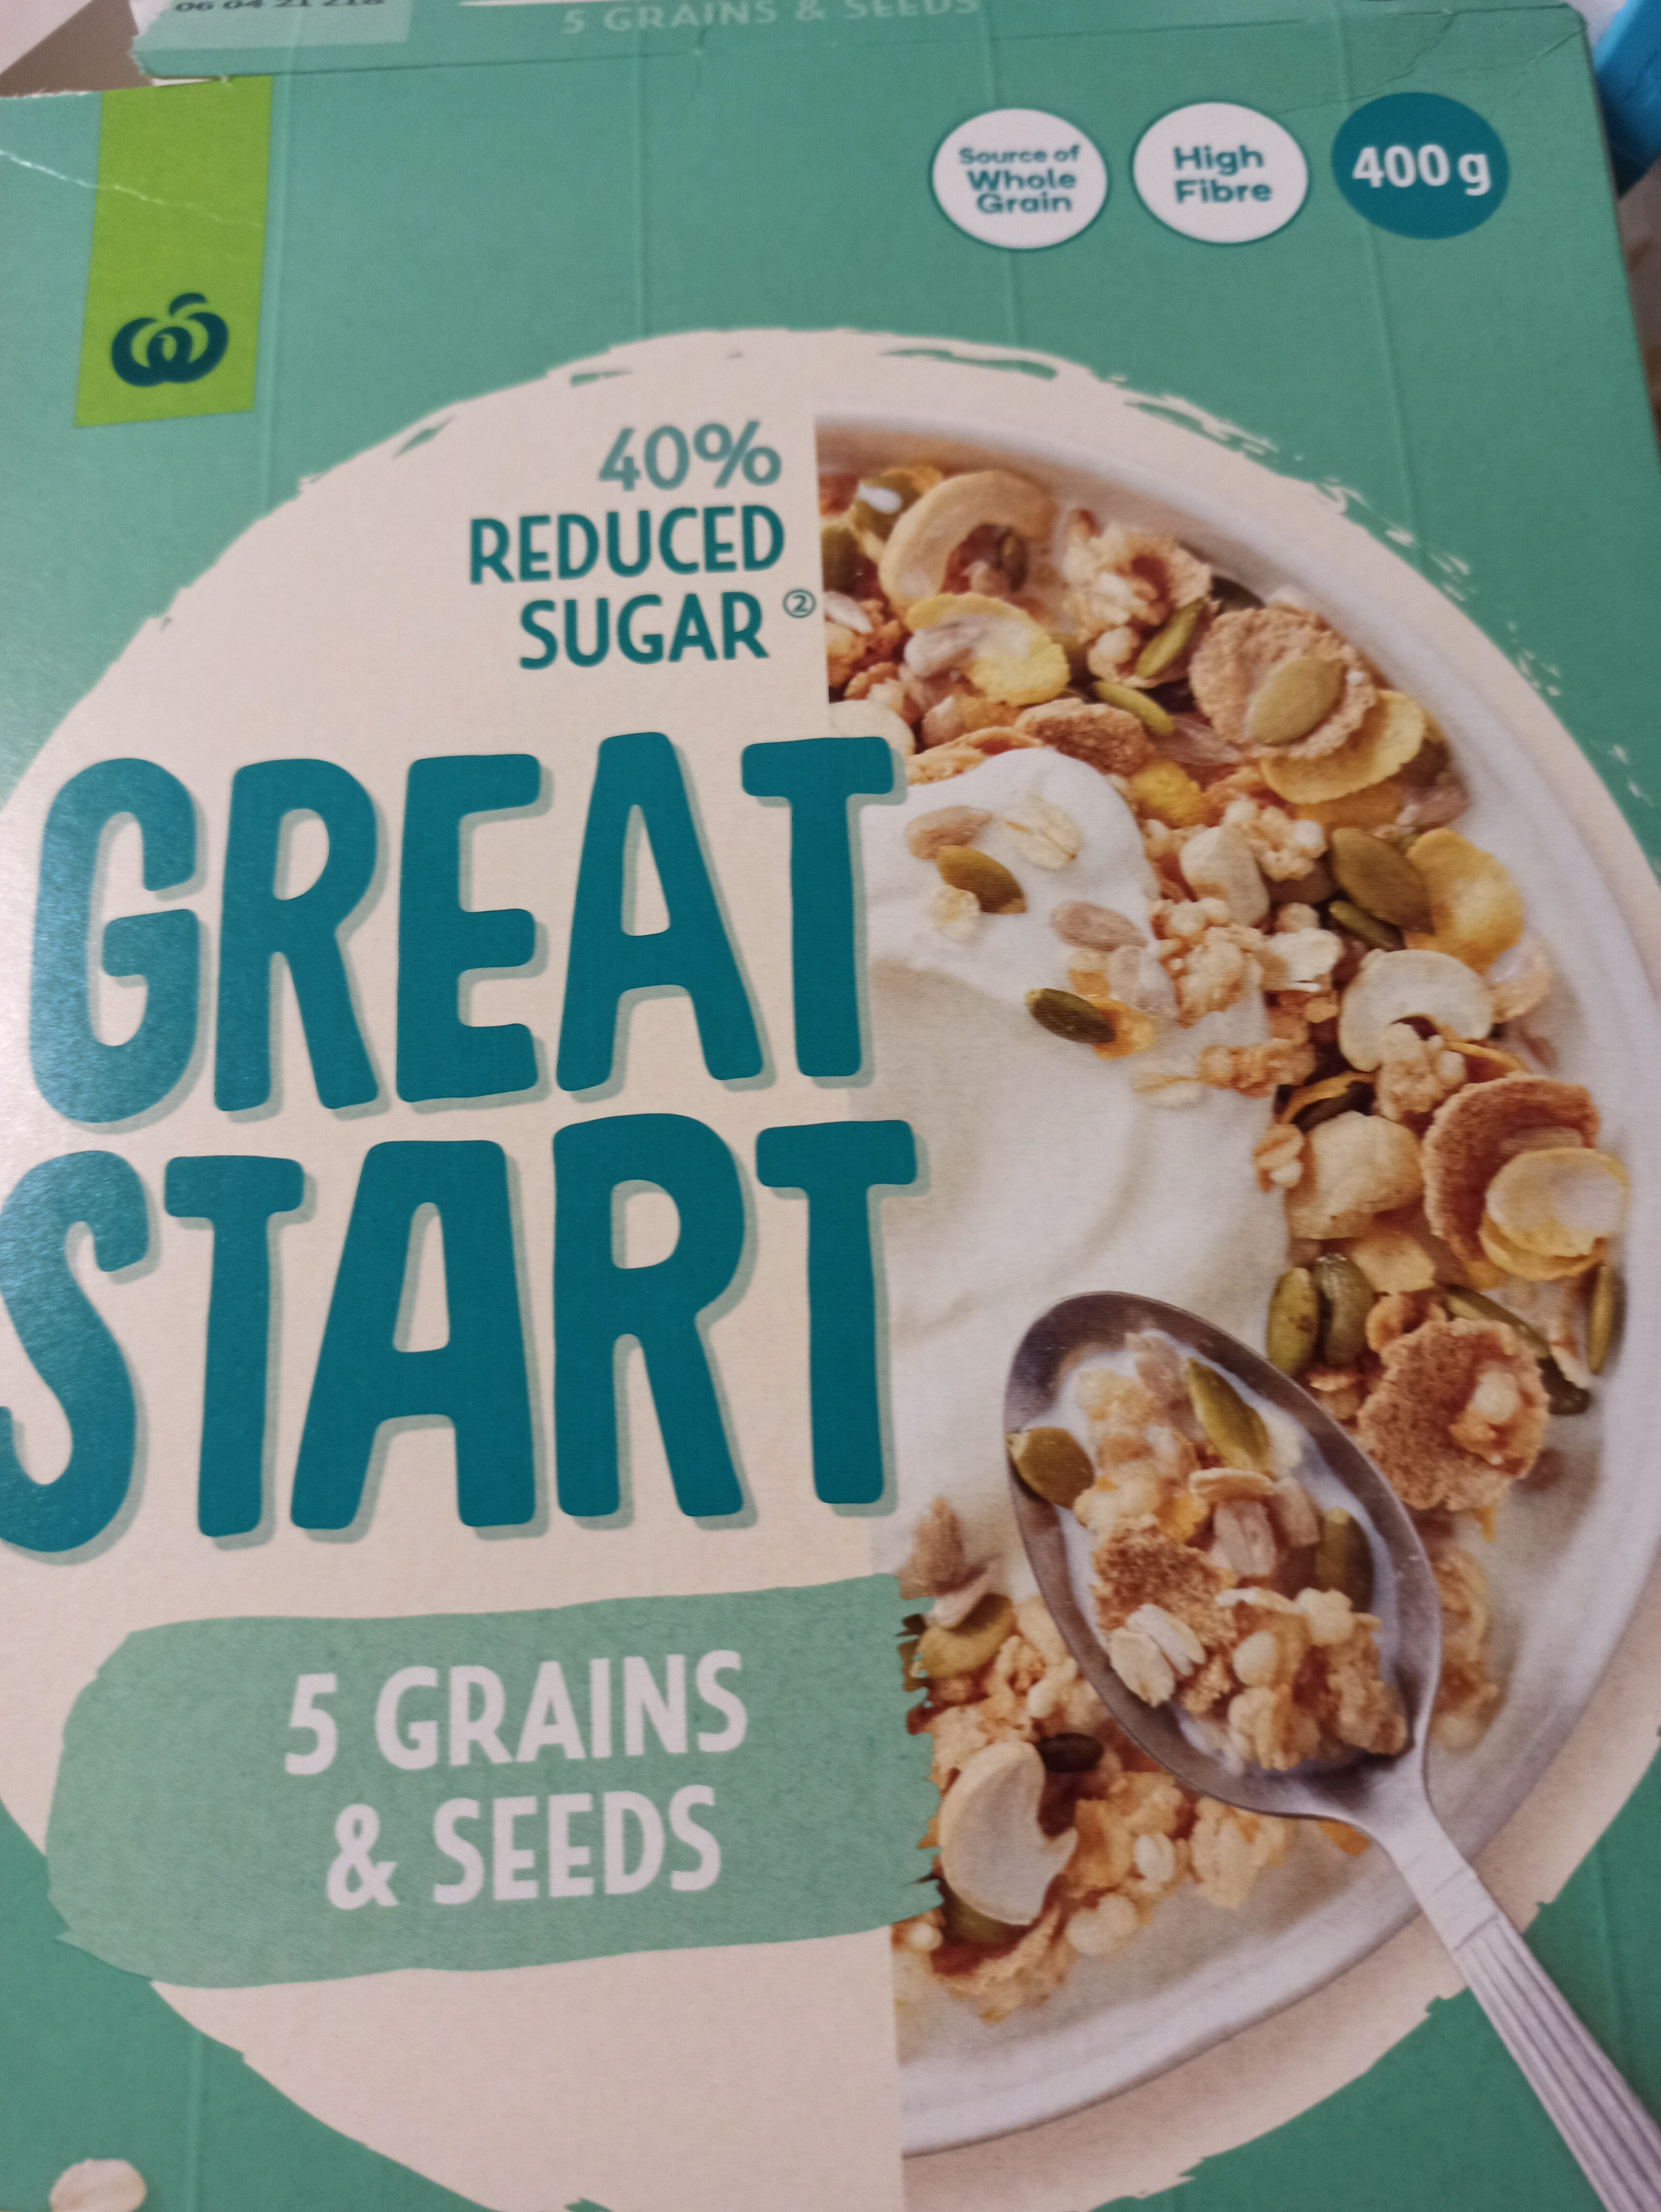 Great Start 5 Grain & Seeds - Product